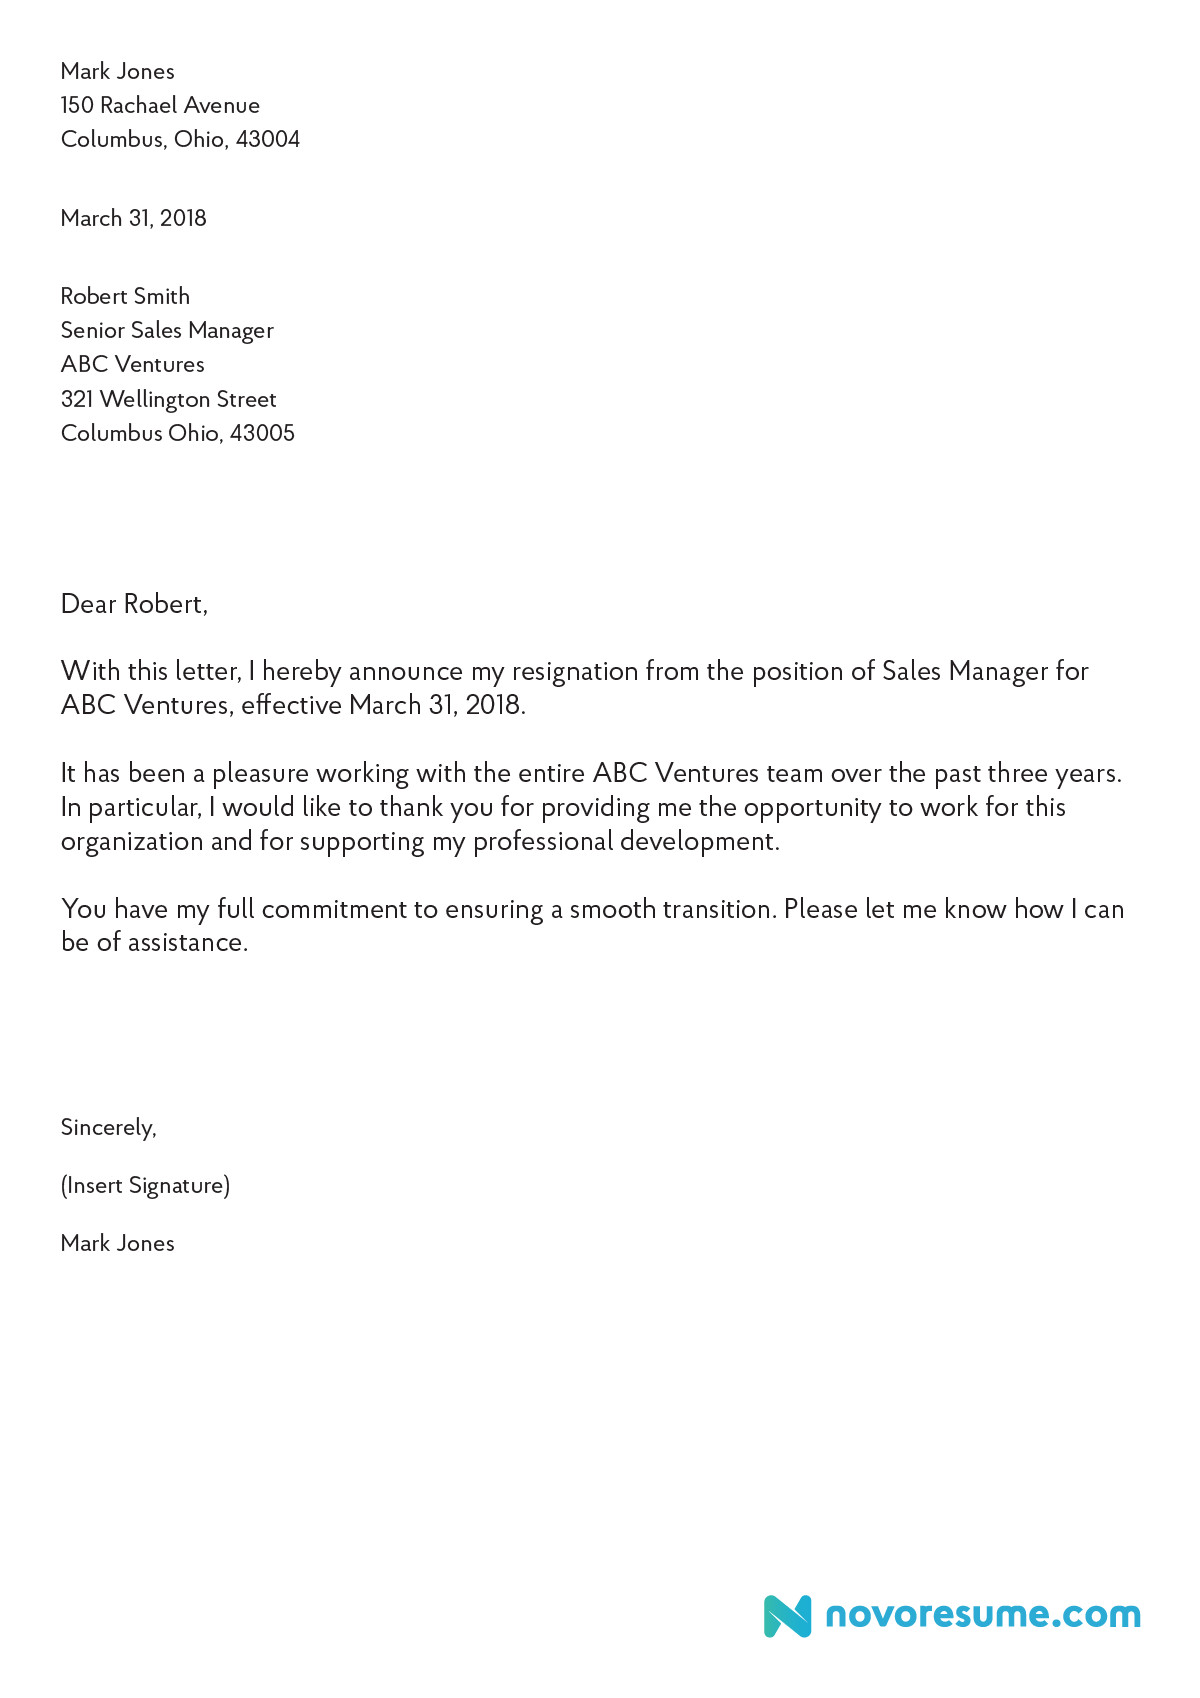 Letter Of Resignation Templates How to Write A Letter Of Resignation – 2019 Extensive Guide